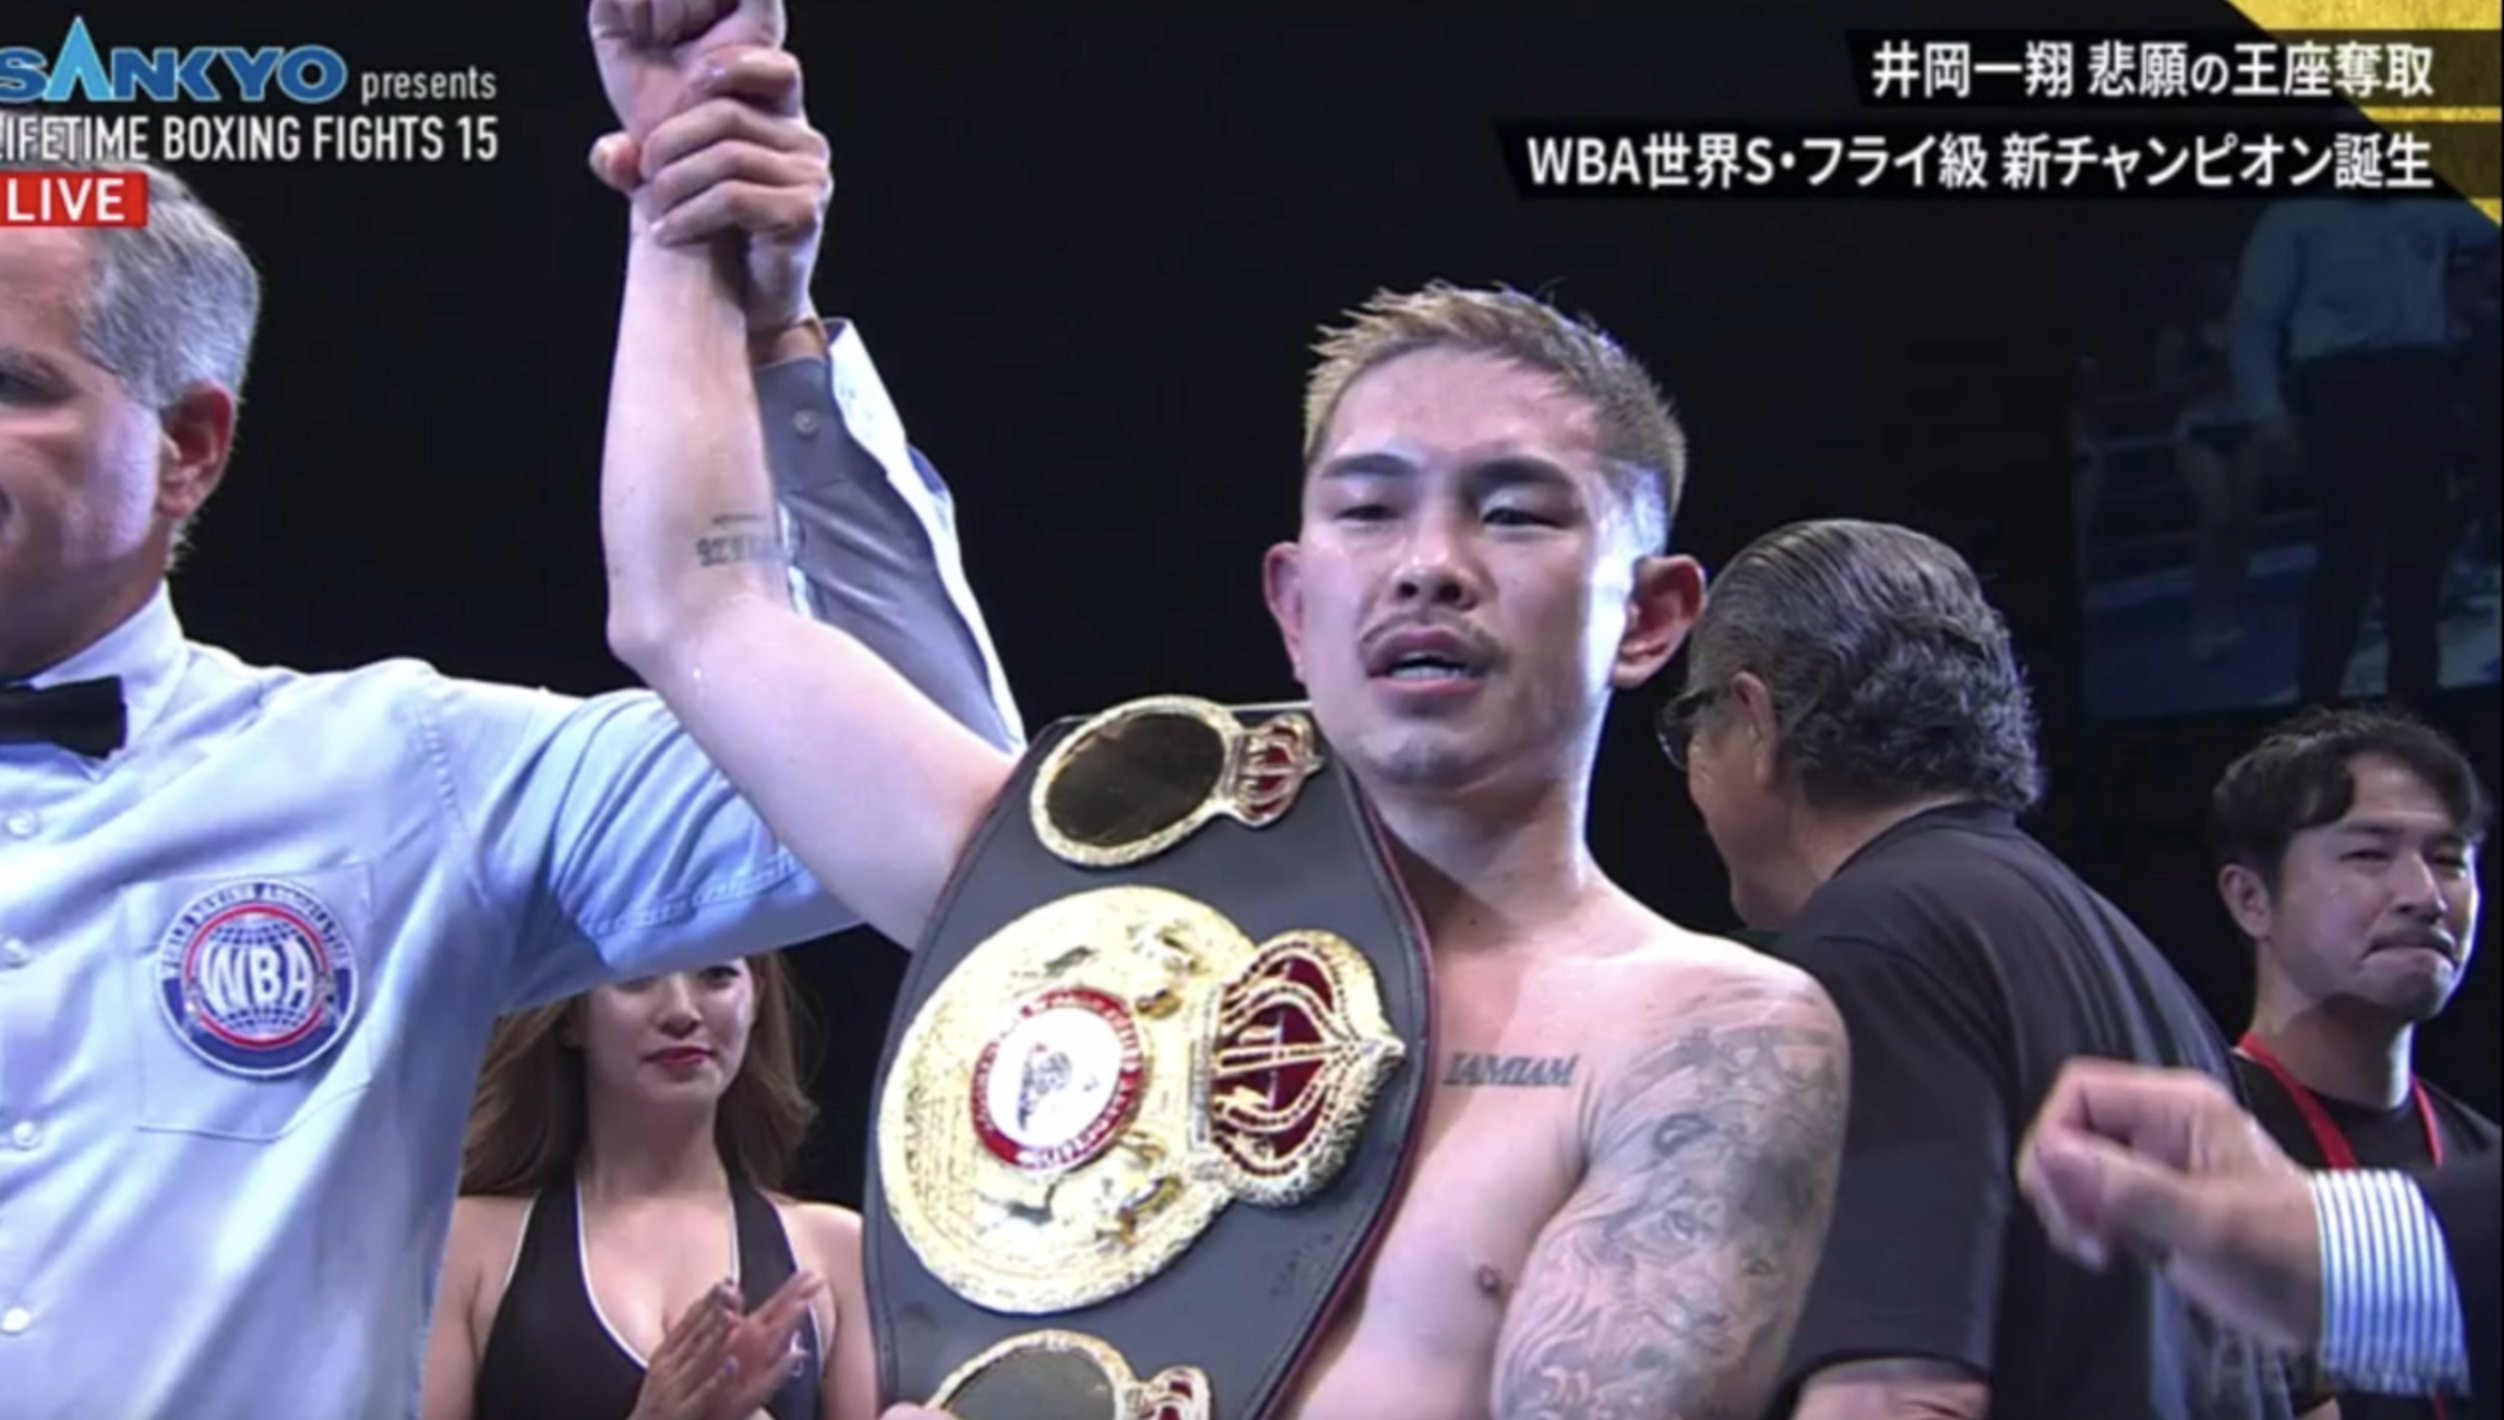 Ioka outboxes overweight Franco to claim WBA world title in Tokyo